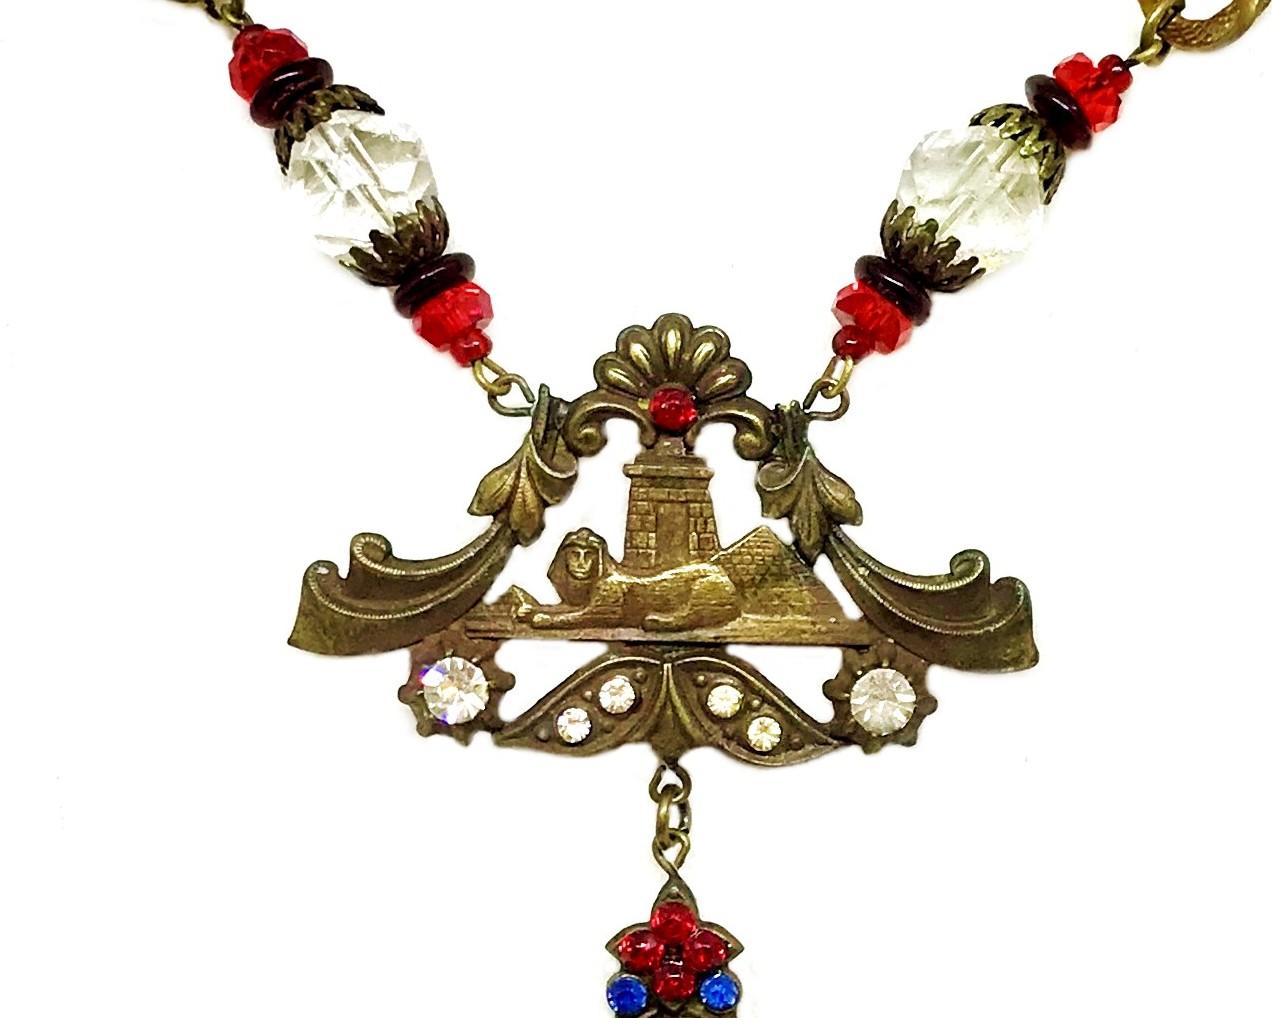 Circa 1920s to 1930s Czechoslovakian Egyptian Revival Necklace In Good Condition For Sale In Long Beach, CA